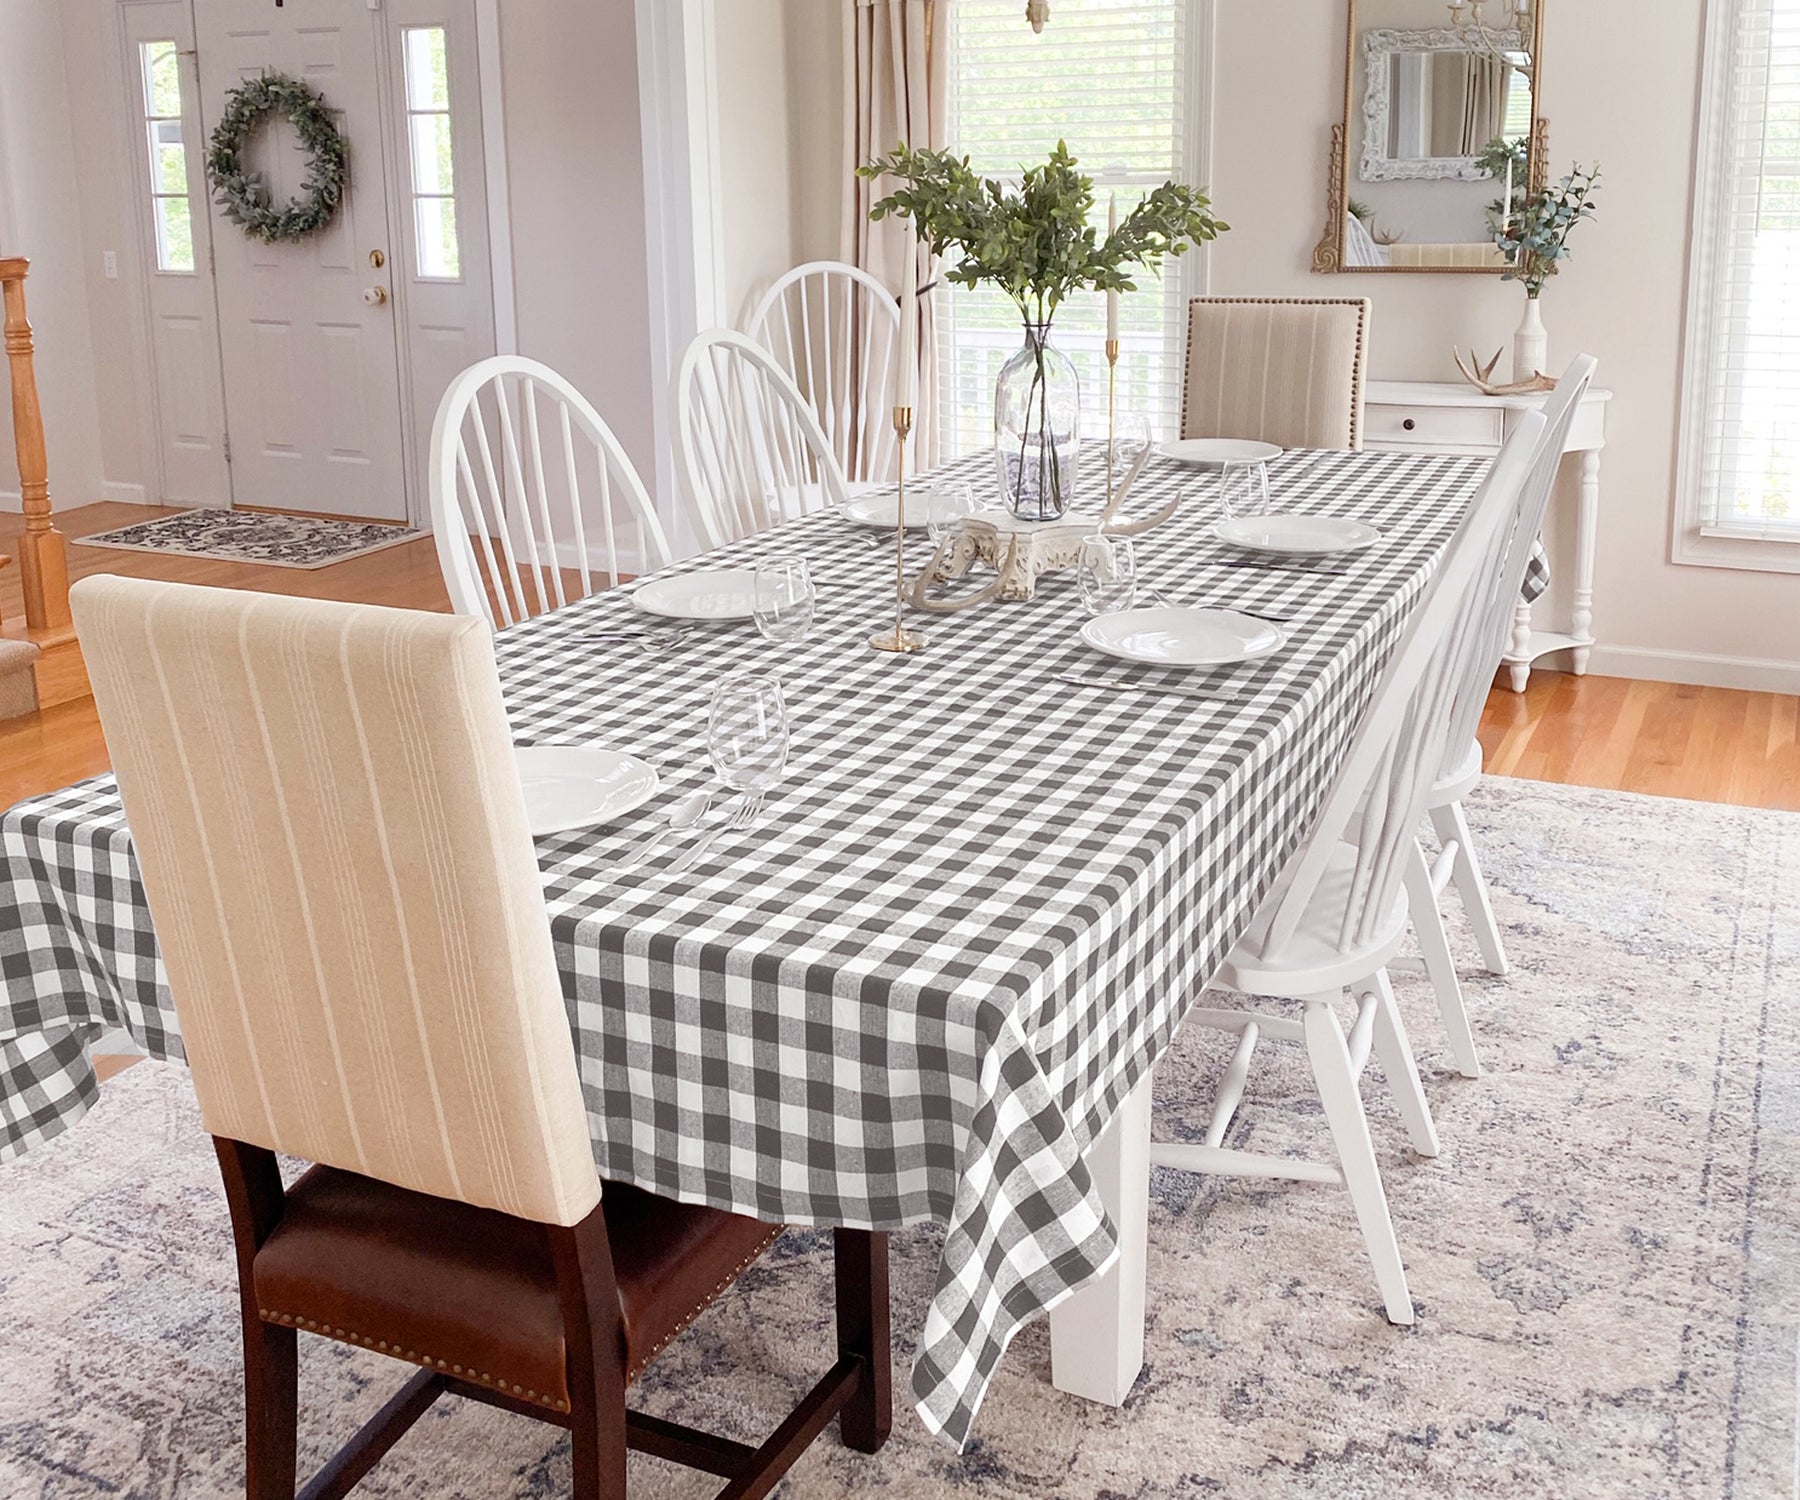 Soft Cotton tablecloth for comfortable and relaxed dining.